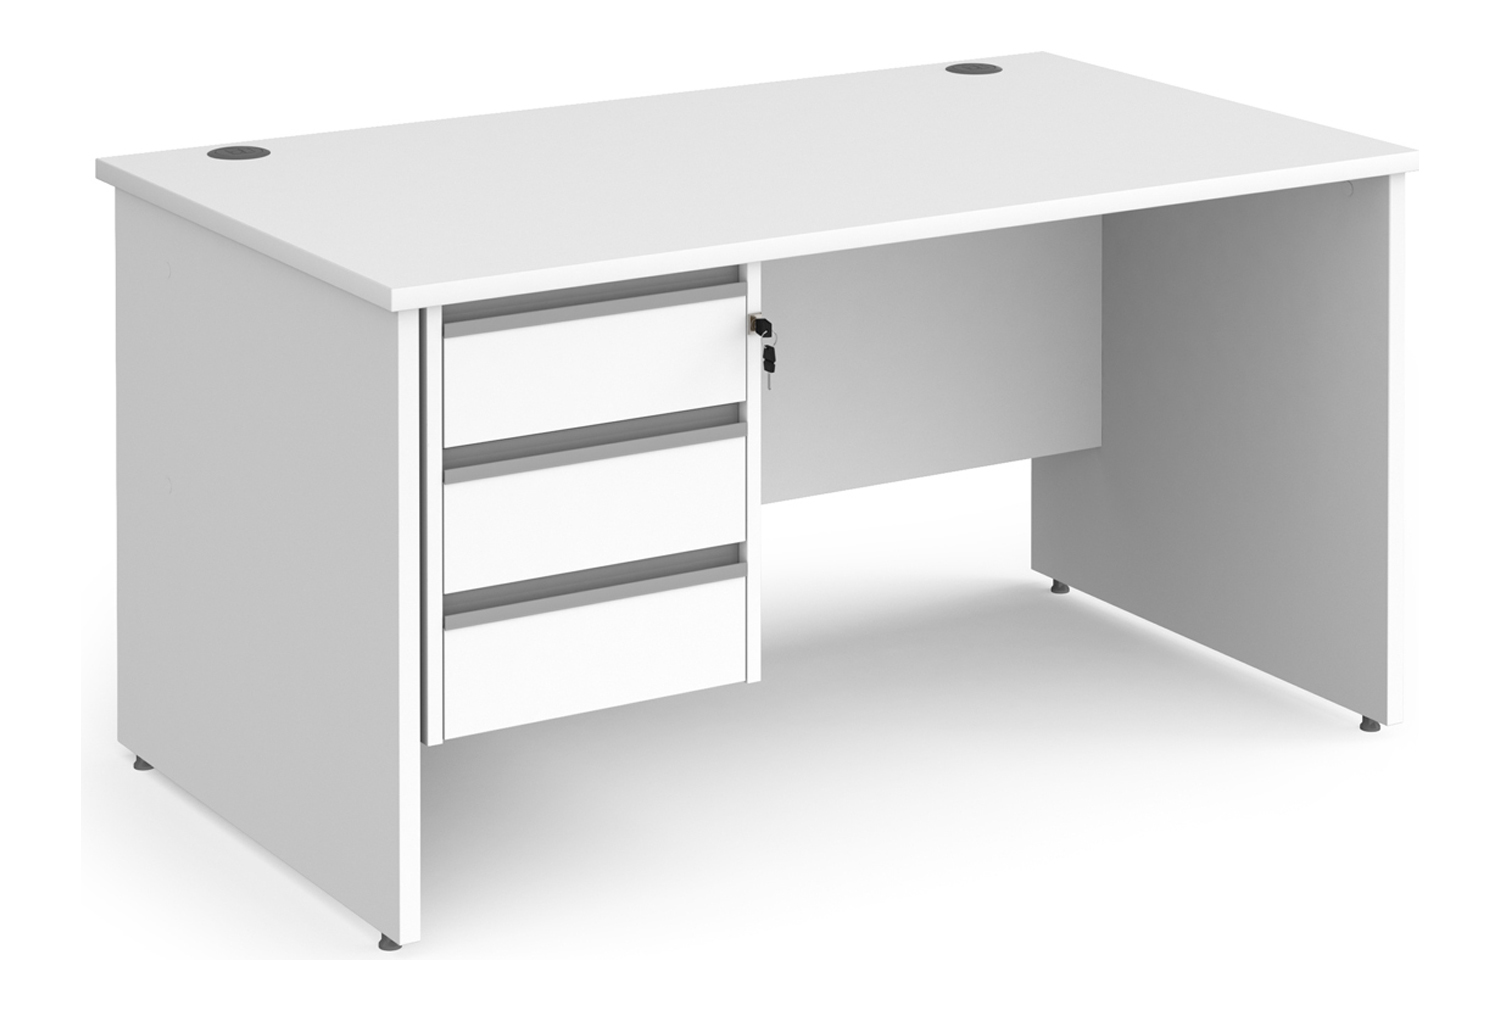 Value Line Classic+ Panel End Office Desk 3 Drawers (Silver Slats), 140wx80dx73h (cm), White, Express Delivery